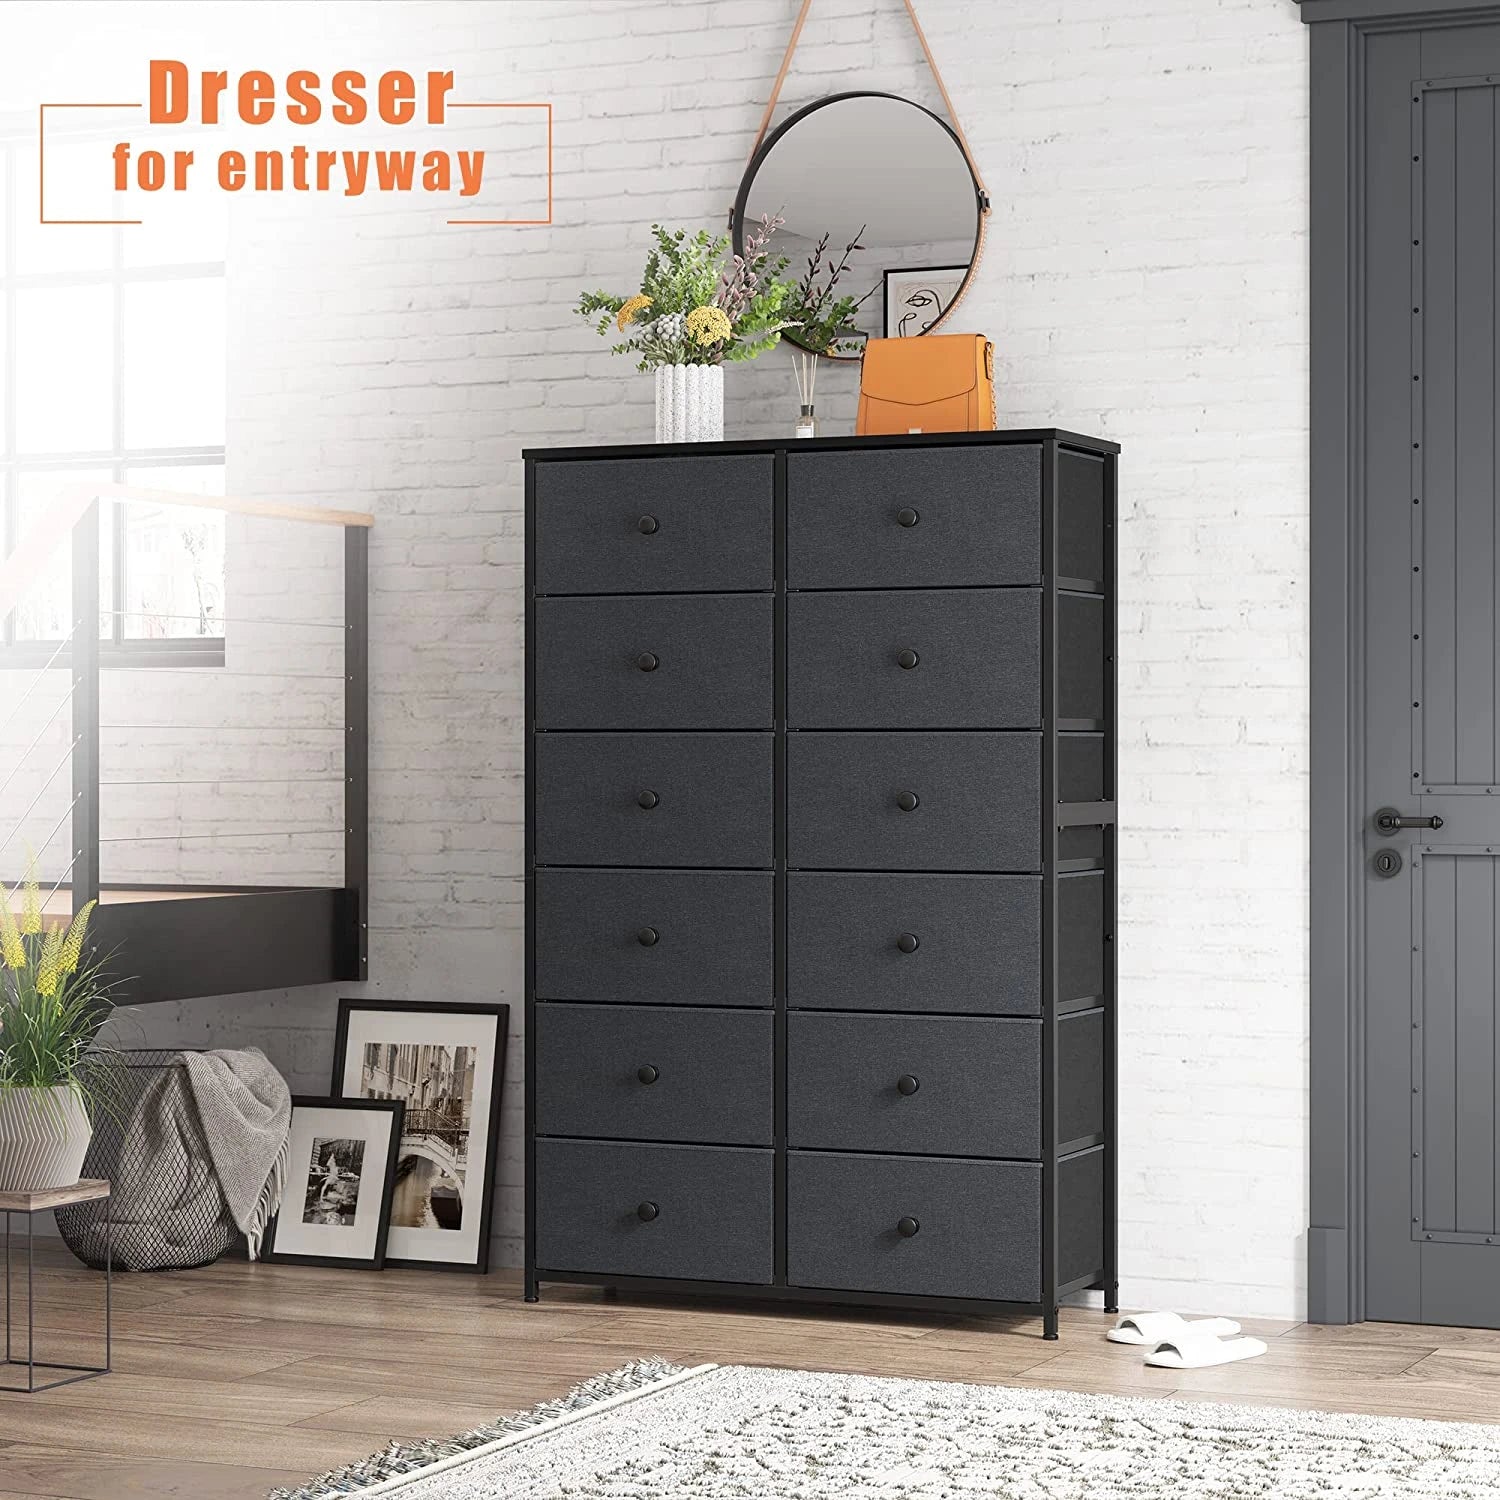 Enhomee dark grey dresser with 12 drawers  for entryway